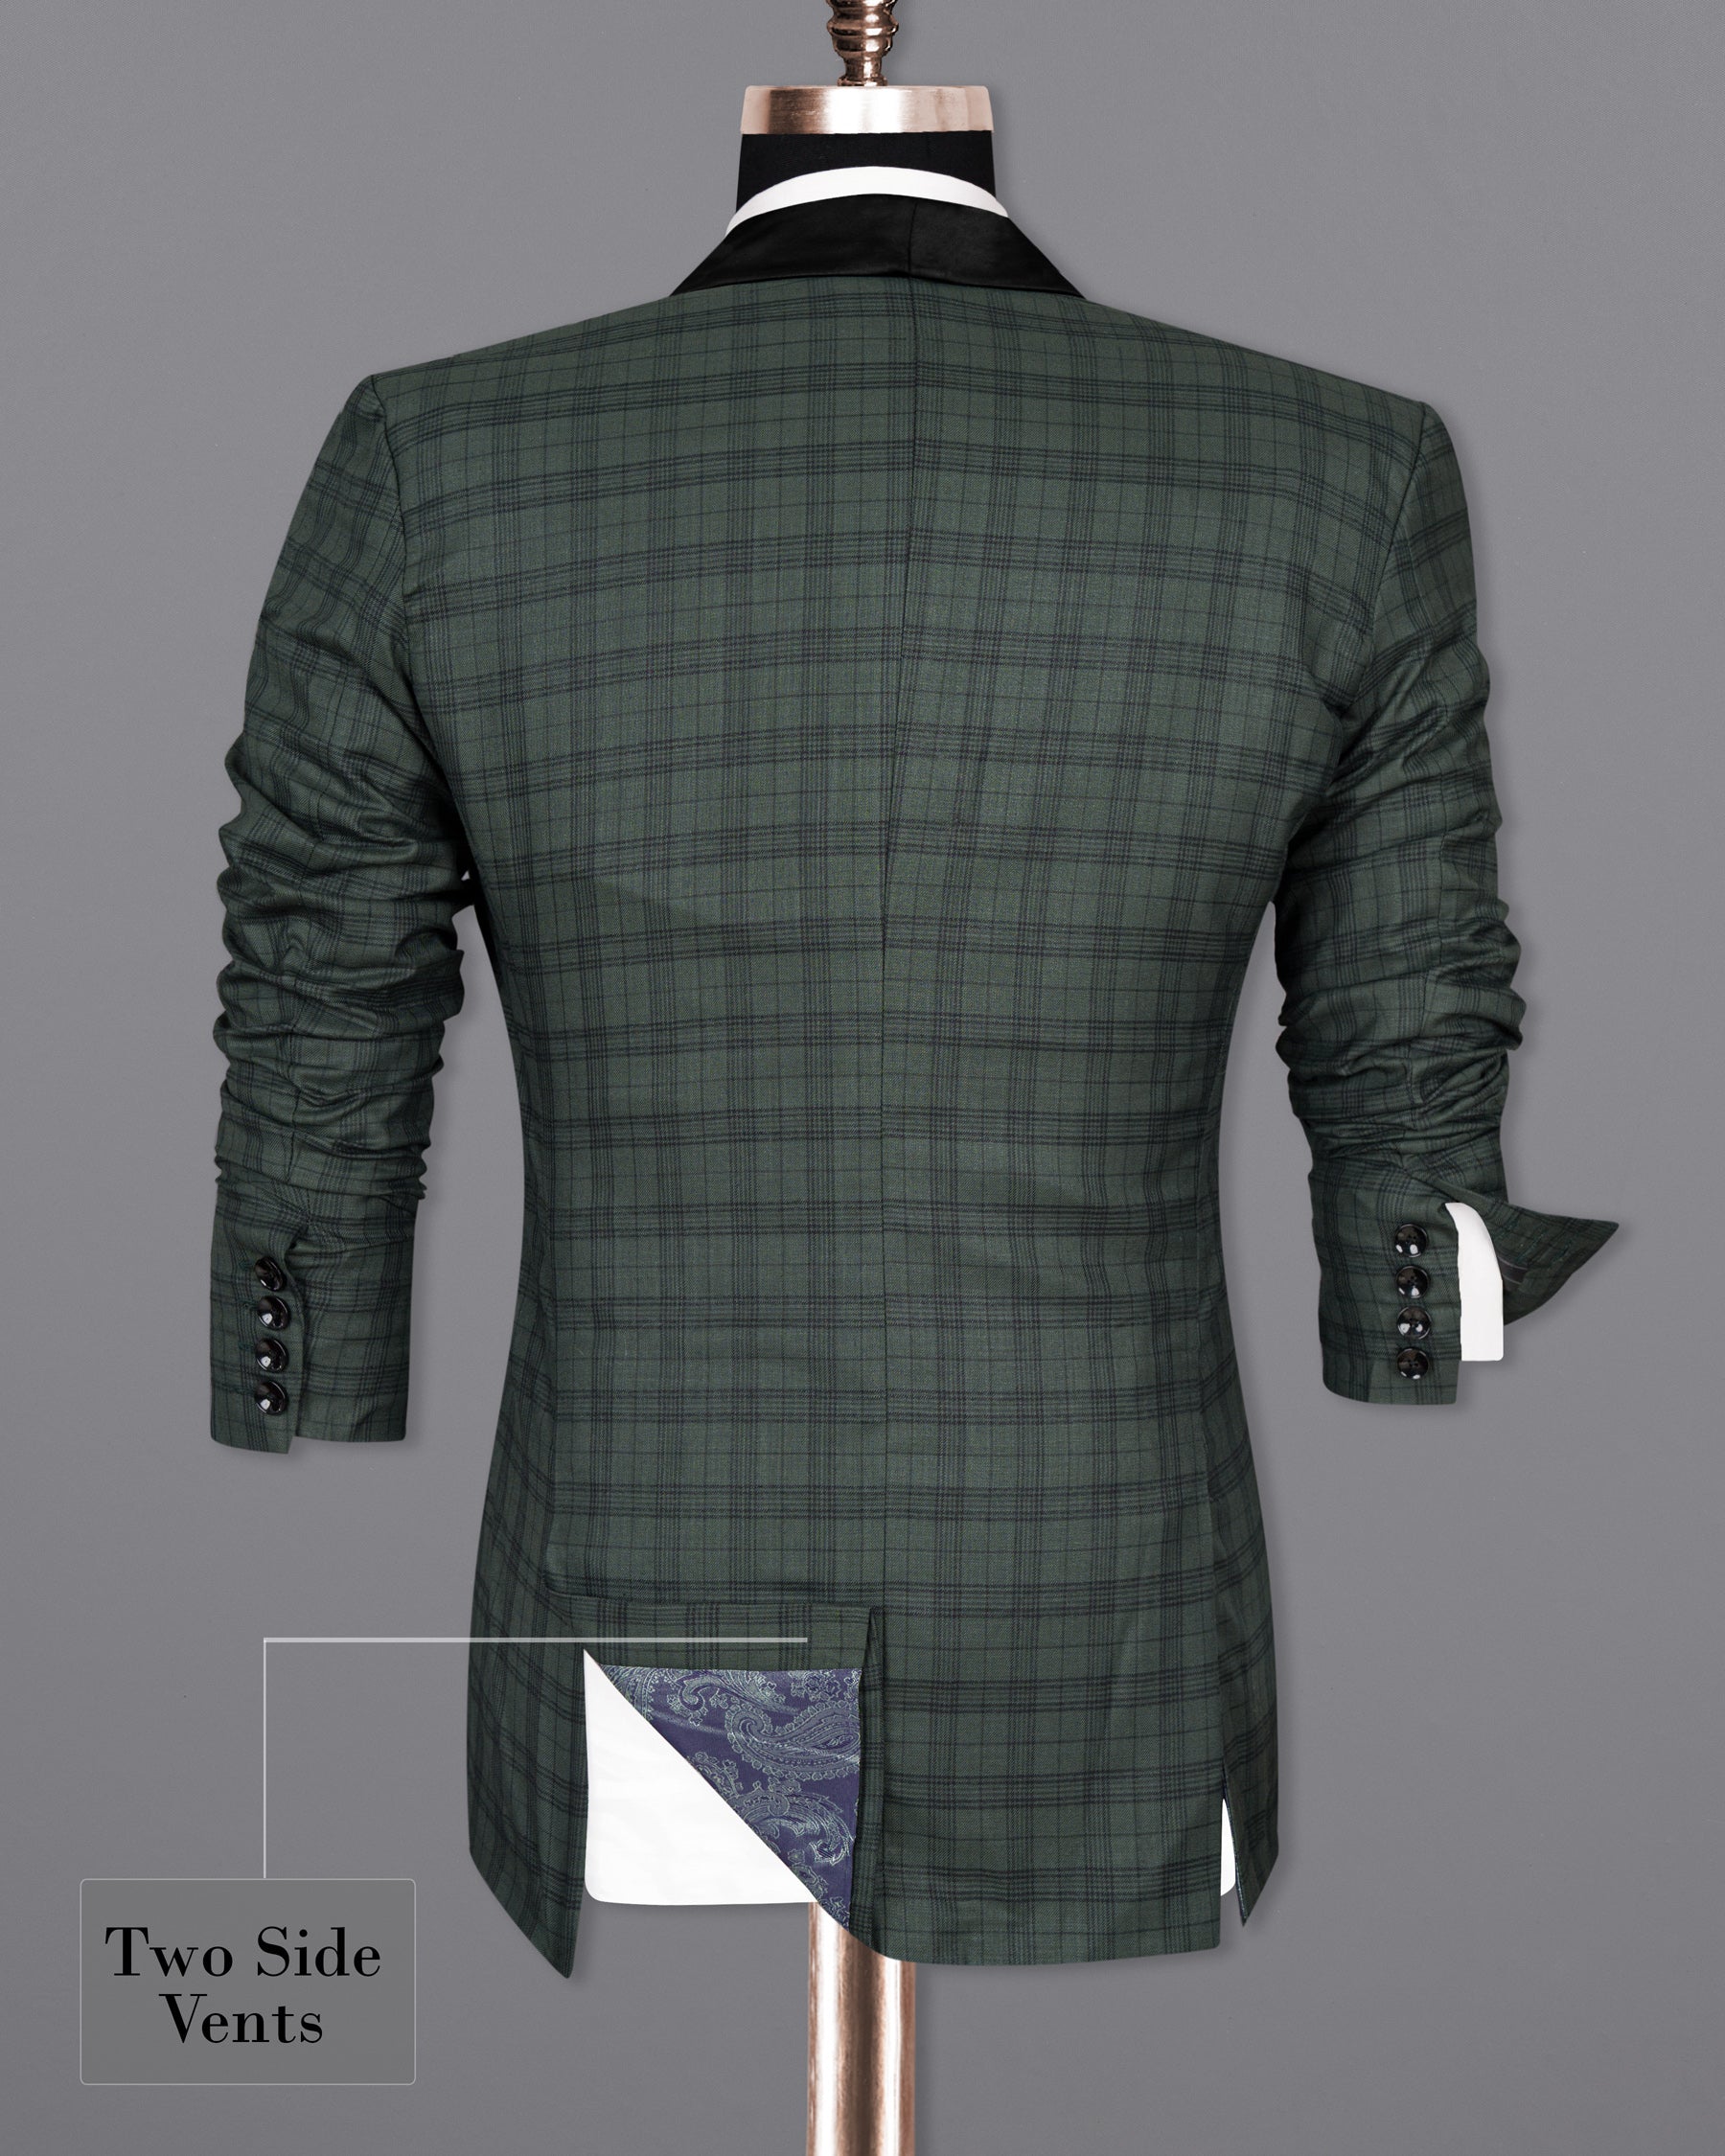 Timber Green Plaid Wool Rich Tuxedo Suit ST1417-BKL-36, ST1417-BKL-38, ST1417-BKL-40, ST1417-BKL-42, ST1417-BKL-44, ST1417-BKL-46, ST1417-BKL-48, ST1417-BKL-50, ST1417-BKL-52, ST1417-BKL-54, ST1417-BKL-56, ST1417-BKL-58, ST1417-BKL-60